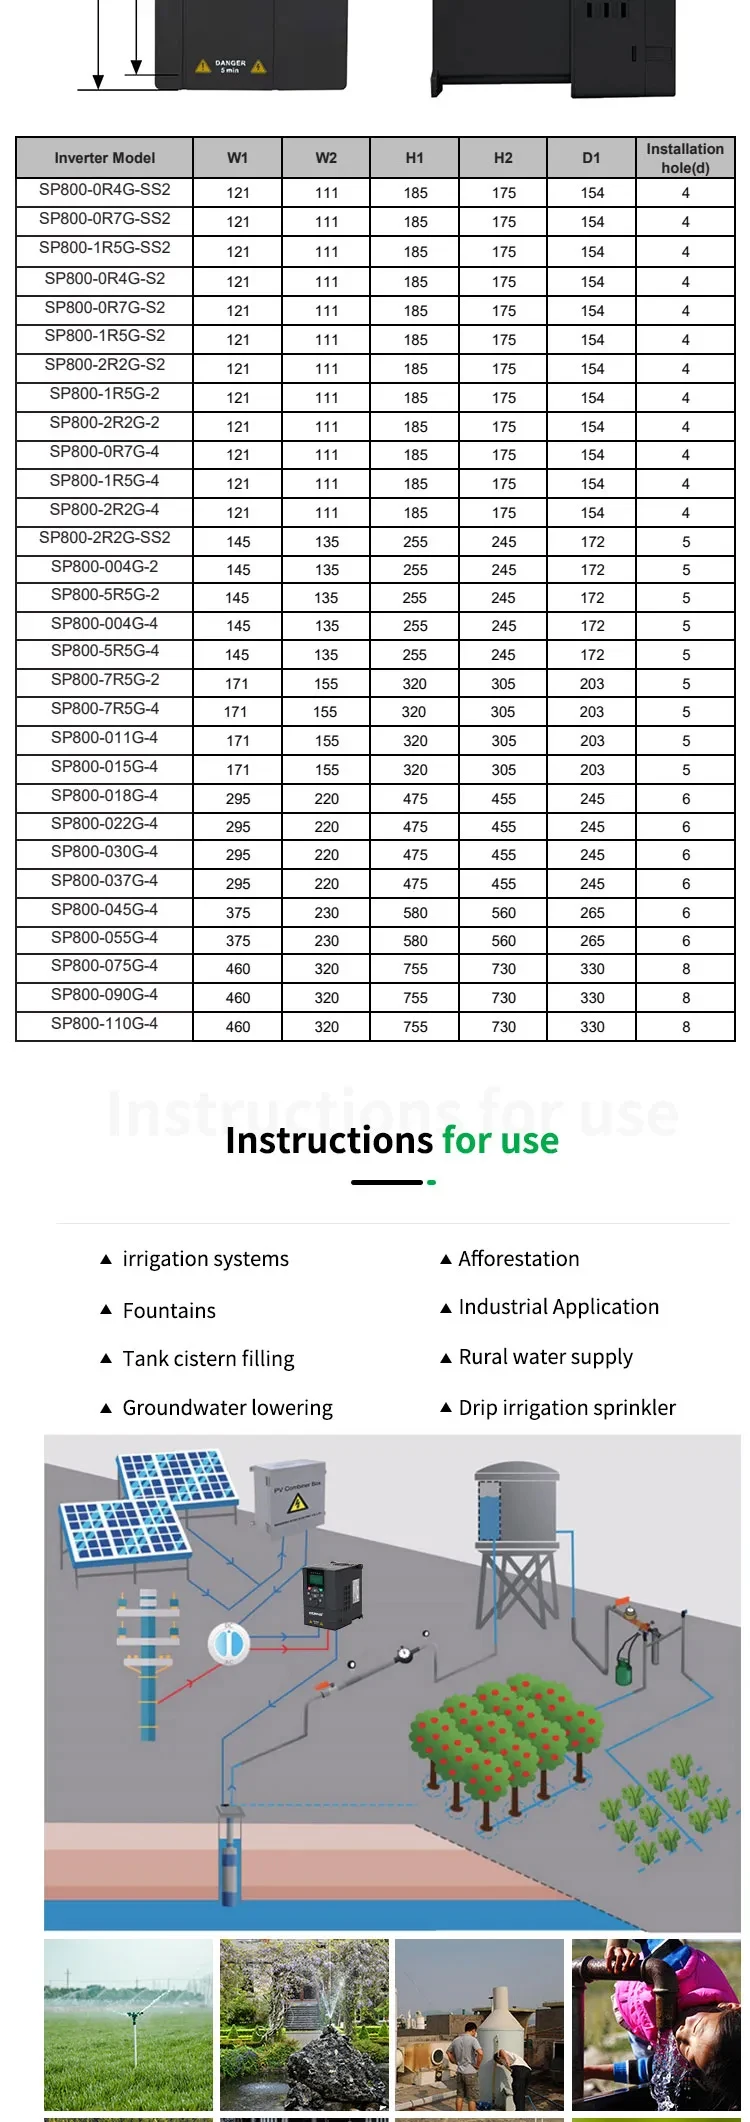 CKMINE Solar Pump VFD 4kW 5.5HP Well Pumping Motor Drive 3 Phase 220V Frequency Inverter for Agriculture Irrigation System factory